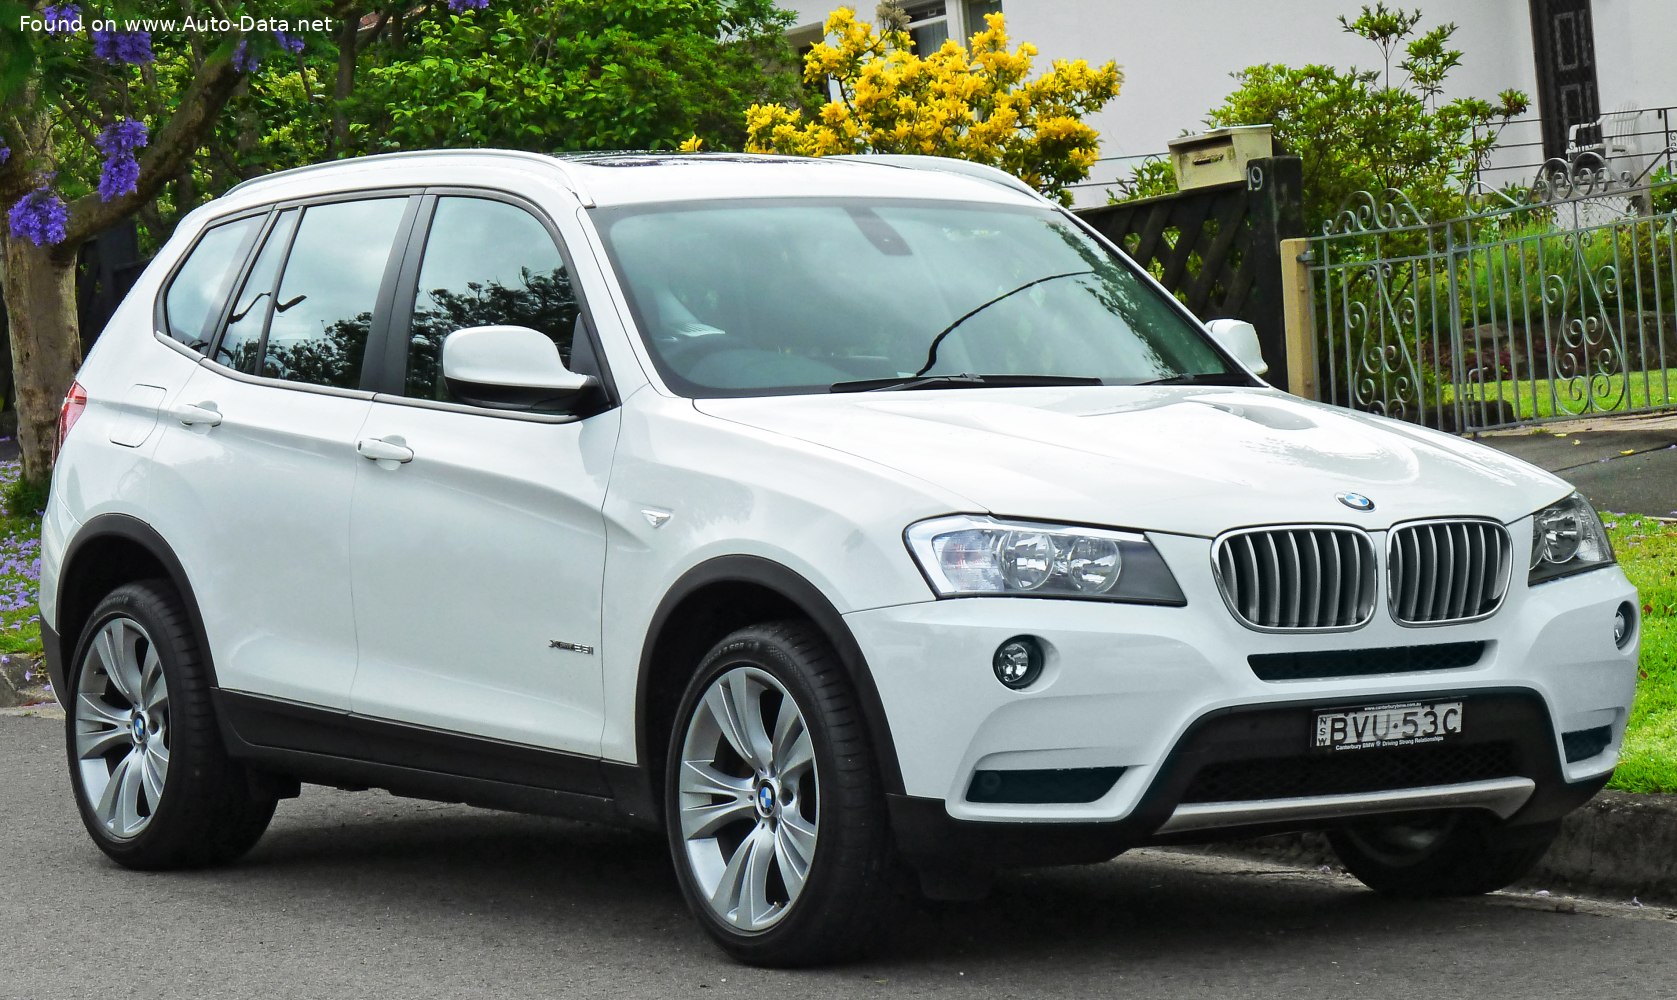 BMW X3 (F25) Photos and Specs. Photo: X3 (F25) BMW models and